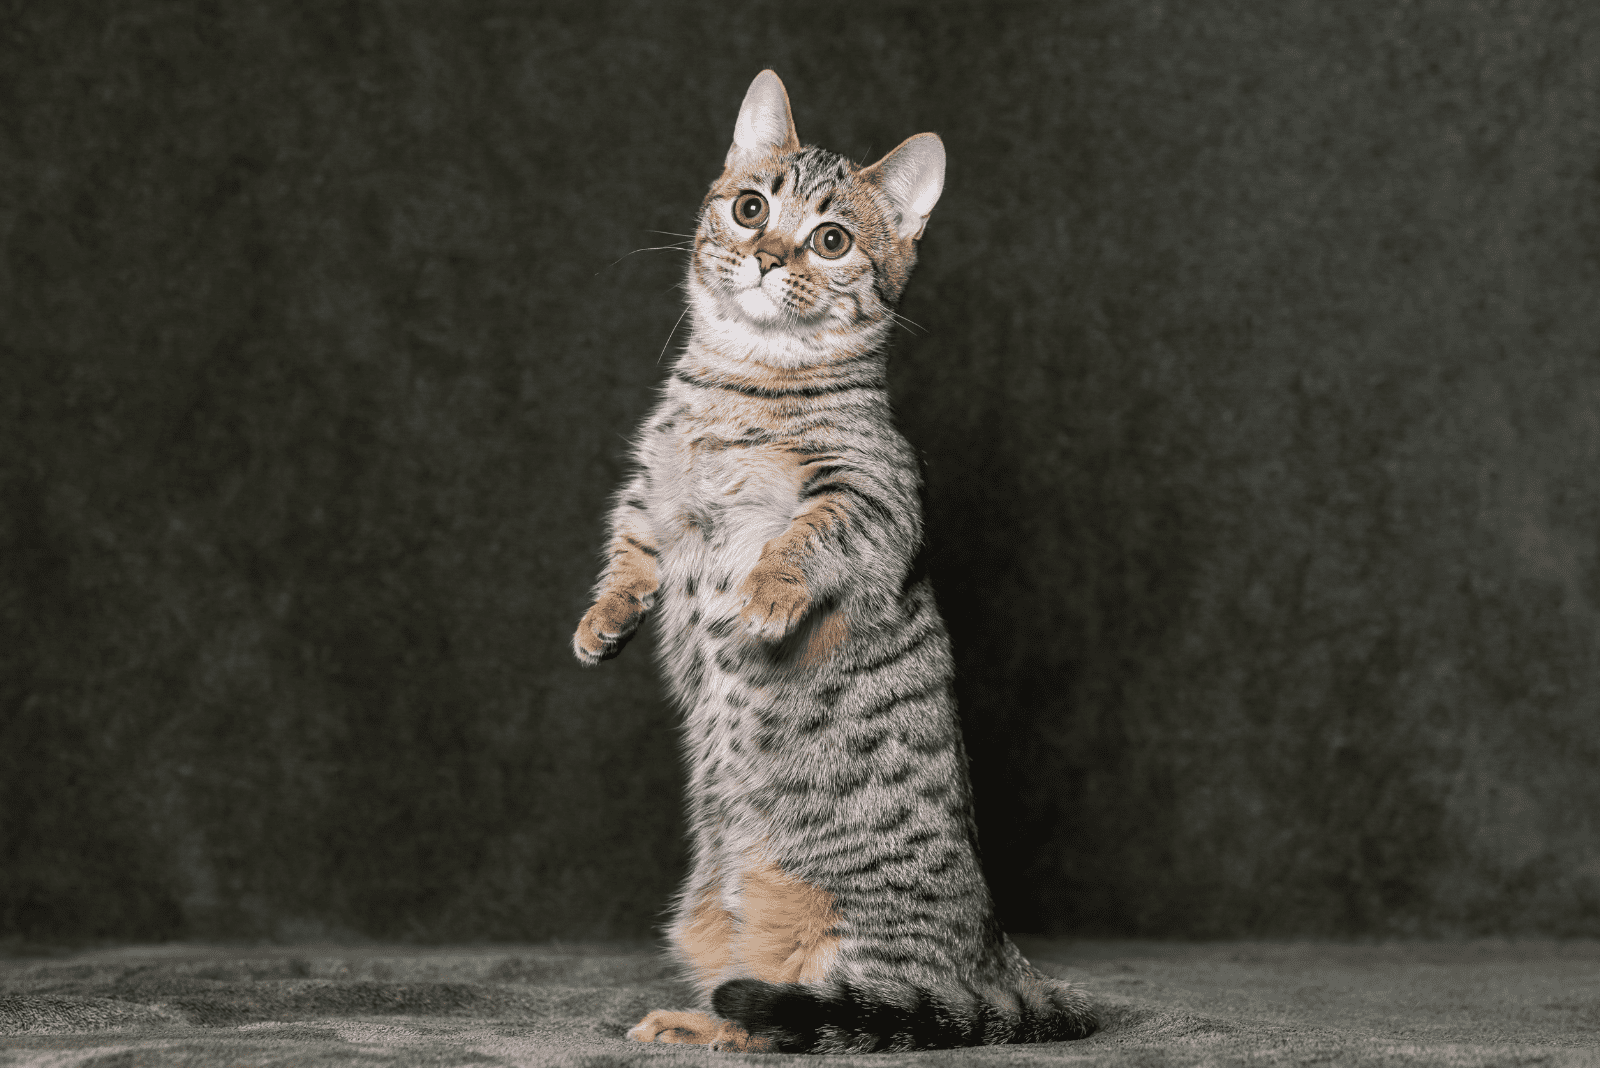 the adorable munchkin cat stands on its hind legs